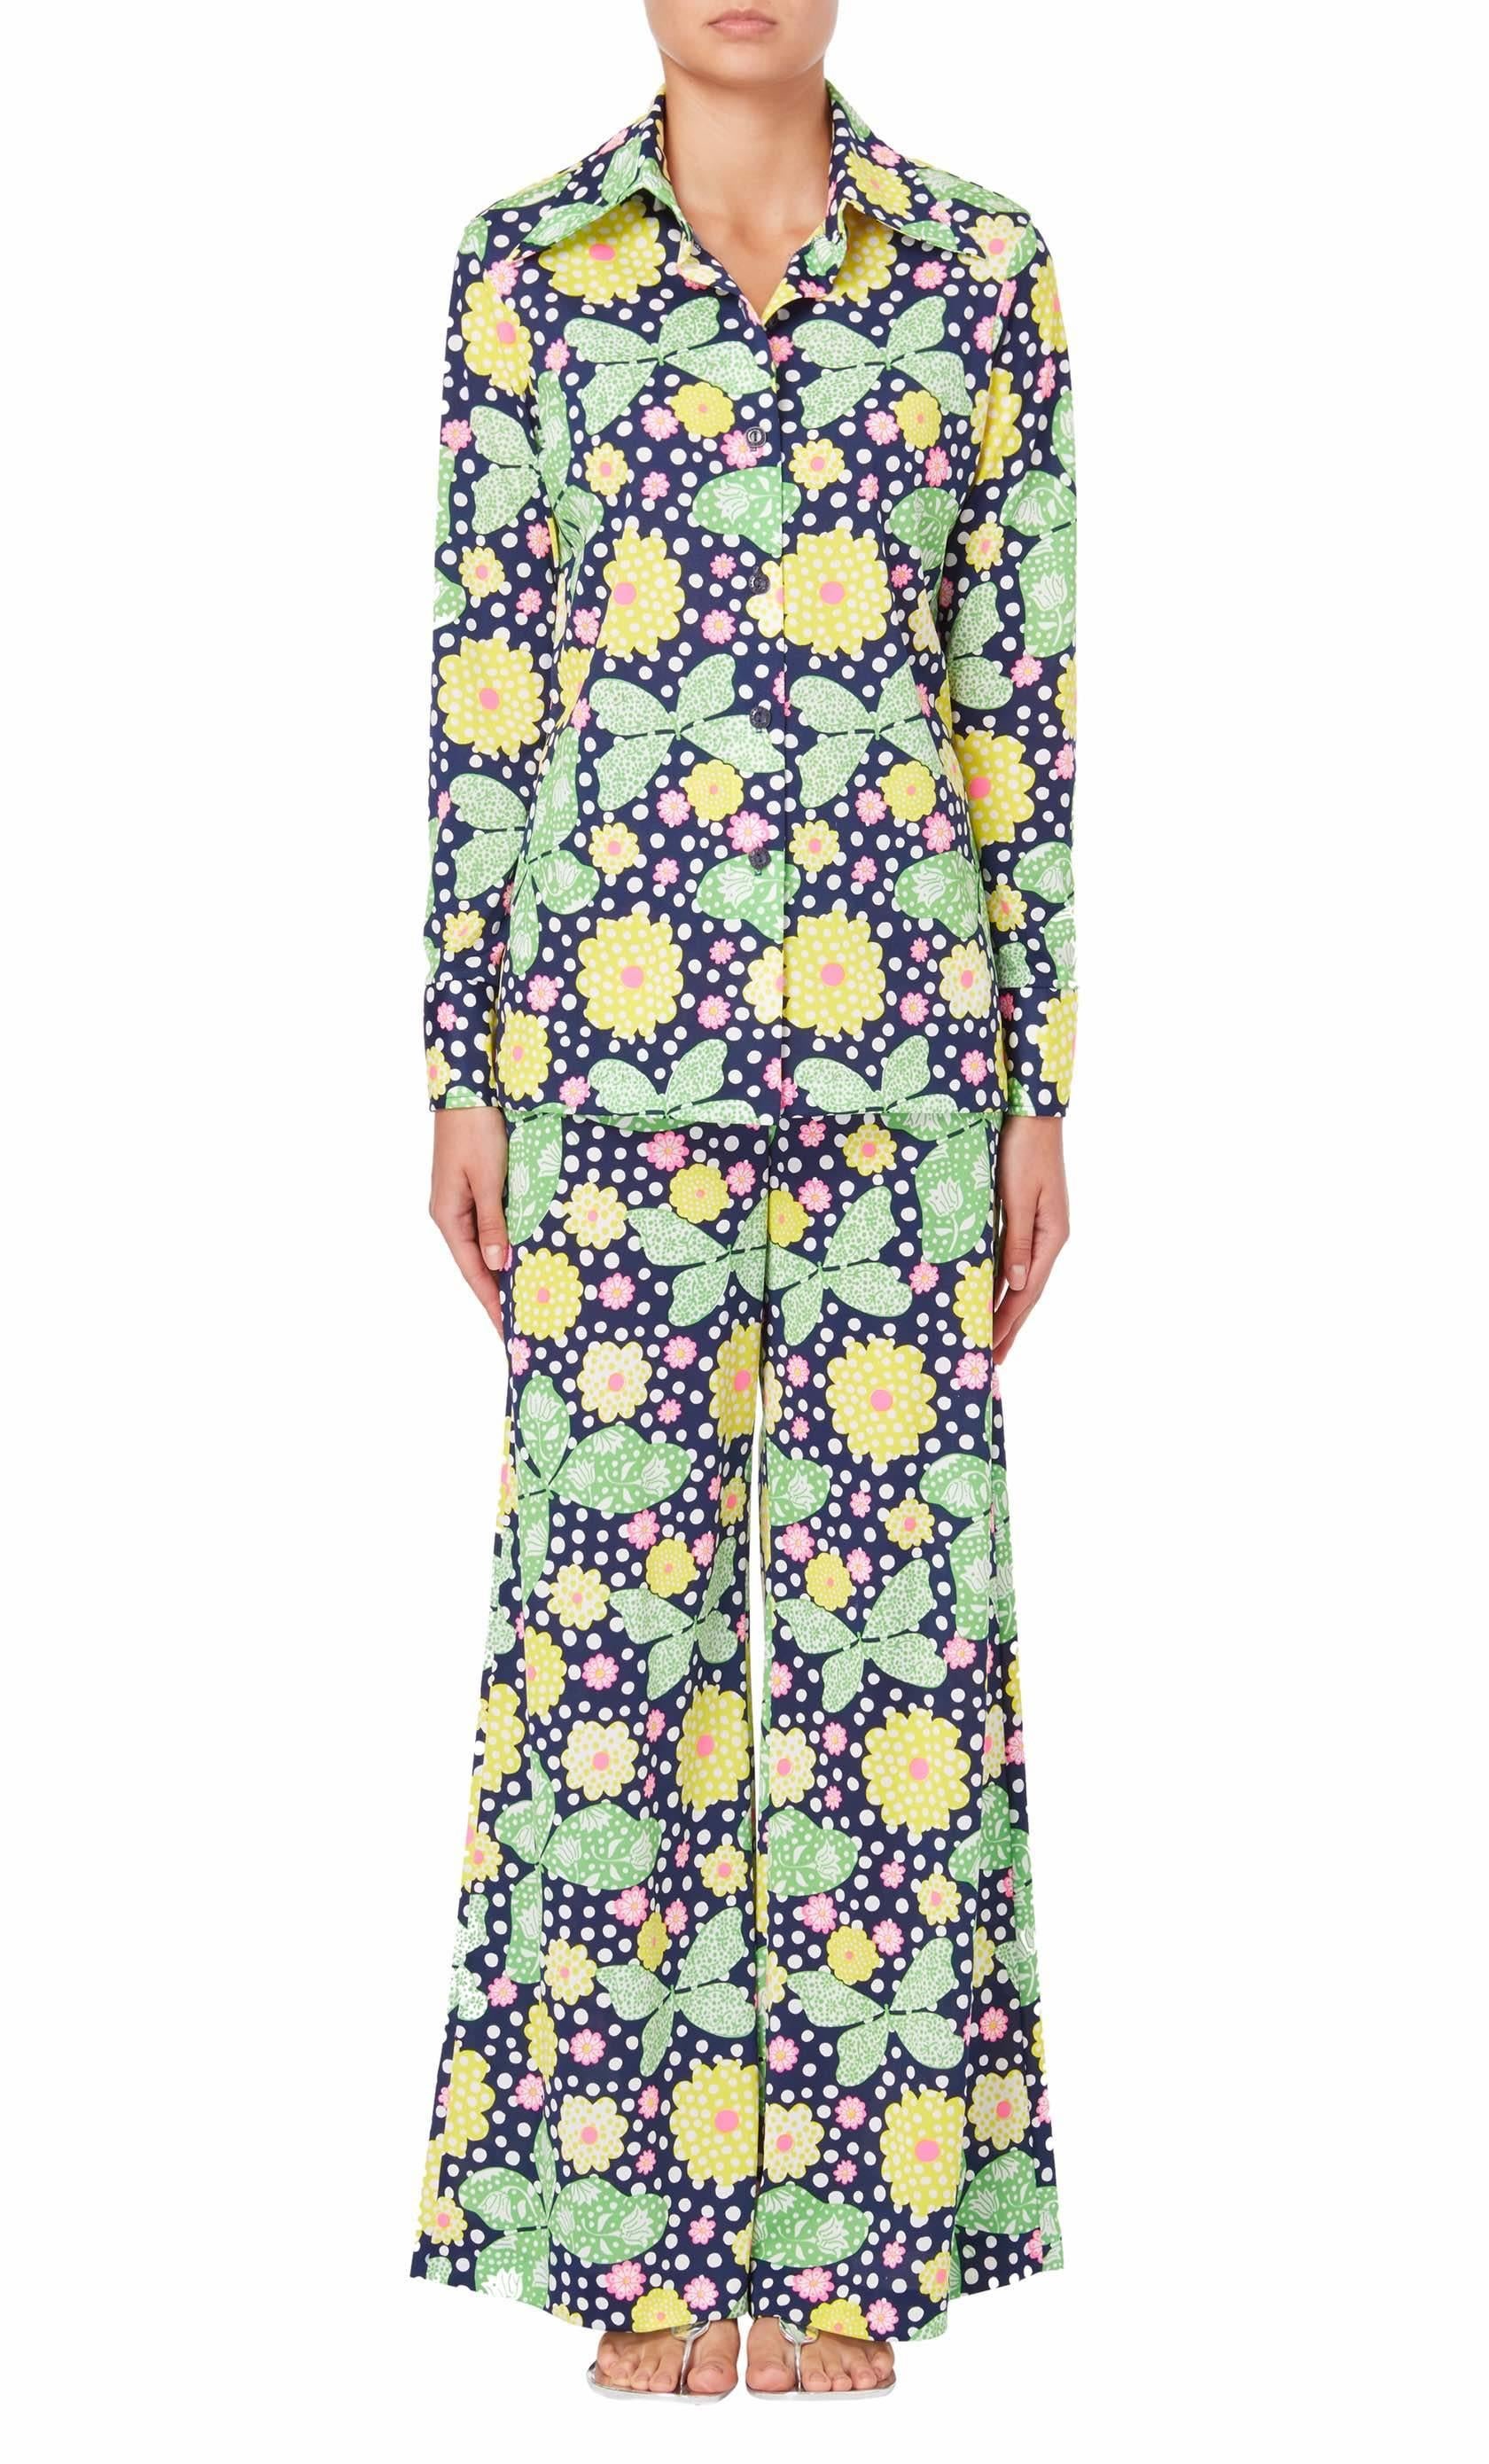 Floral printed ensemble by Lily Pulitzer, circa 1968. The ensemble with an all-over print comprises a shirt and matching high waisted, flared trousers.